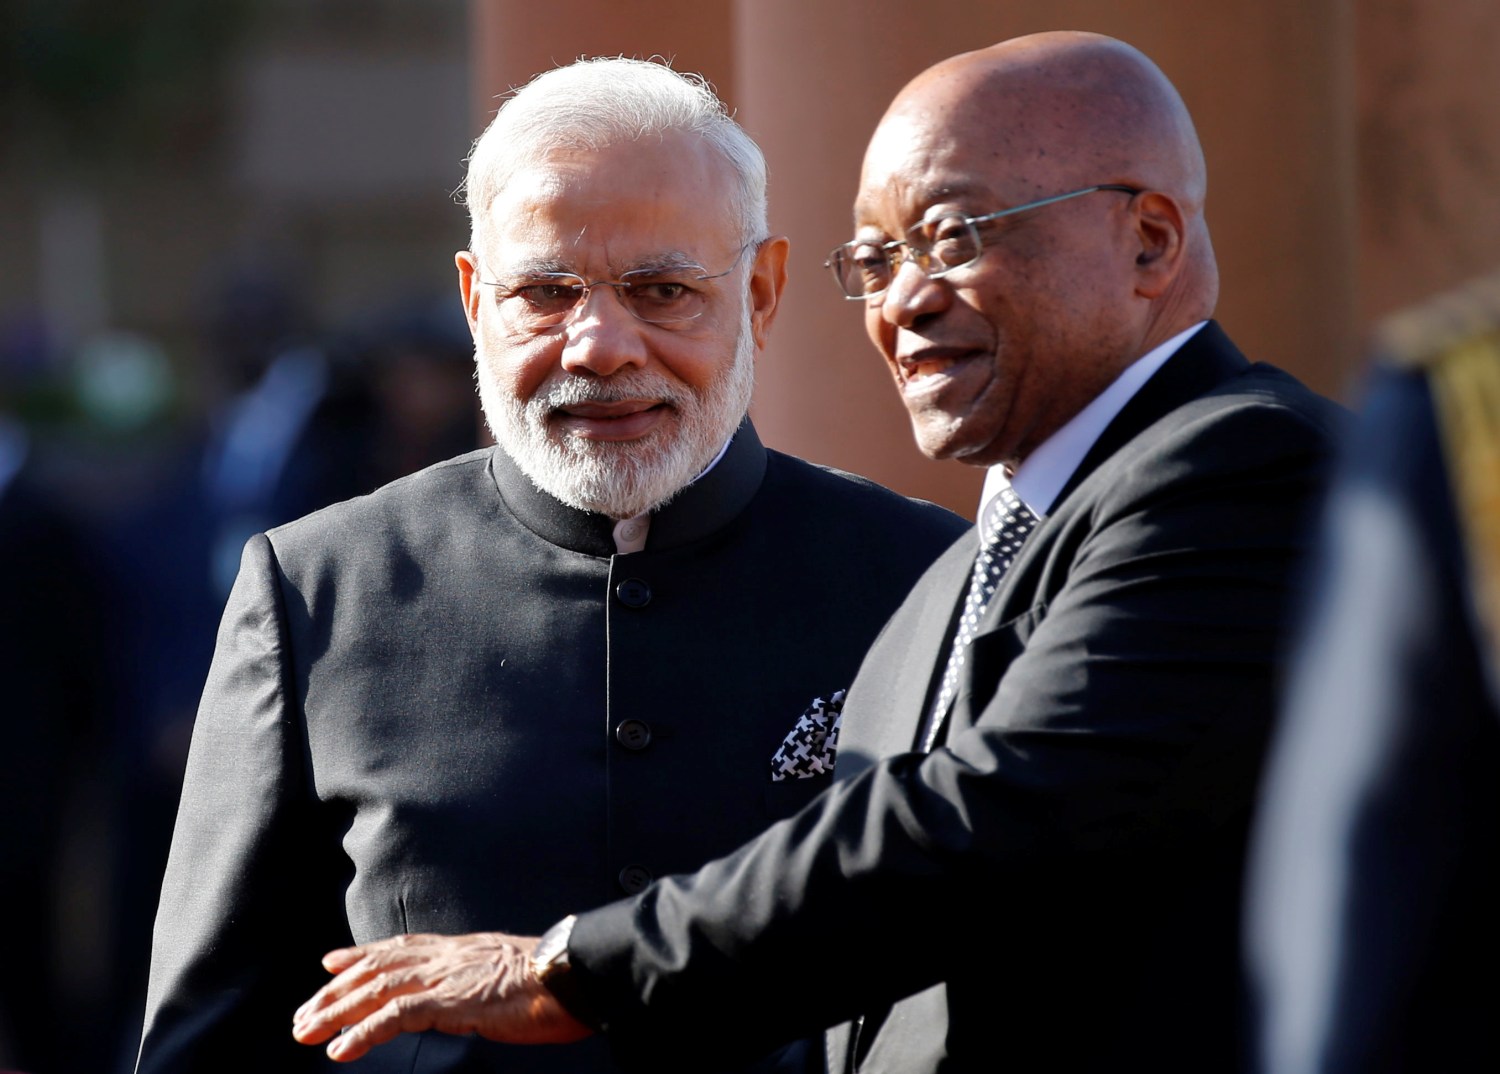 South Africa's President Jacob Zuma gestures next to India's Prime Minister Narendra Modi (L) during his state visit at the Union Buildings in Pretoria, South Africa July 8, 2016. REUTERS/Siphiwe Sibeko - RTX2KABT